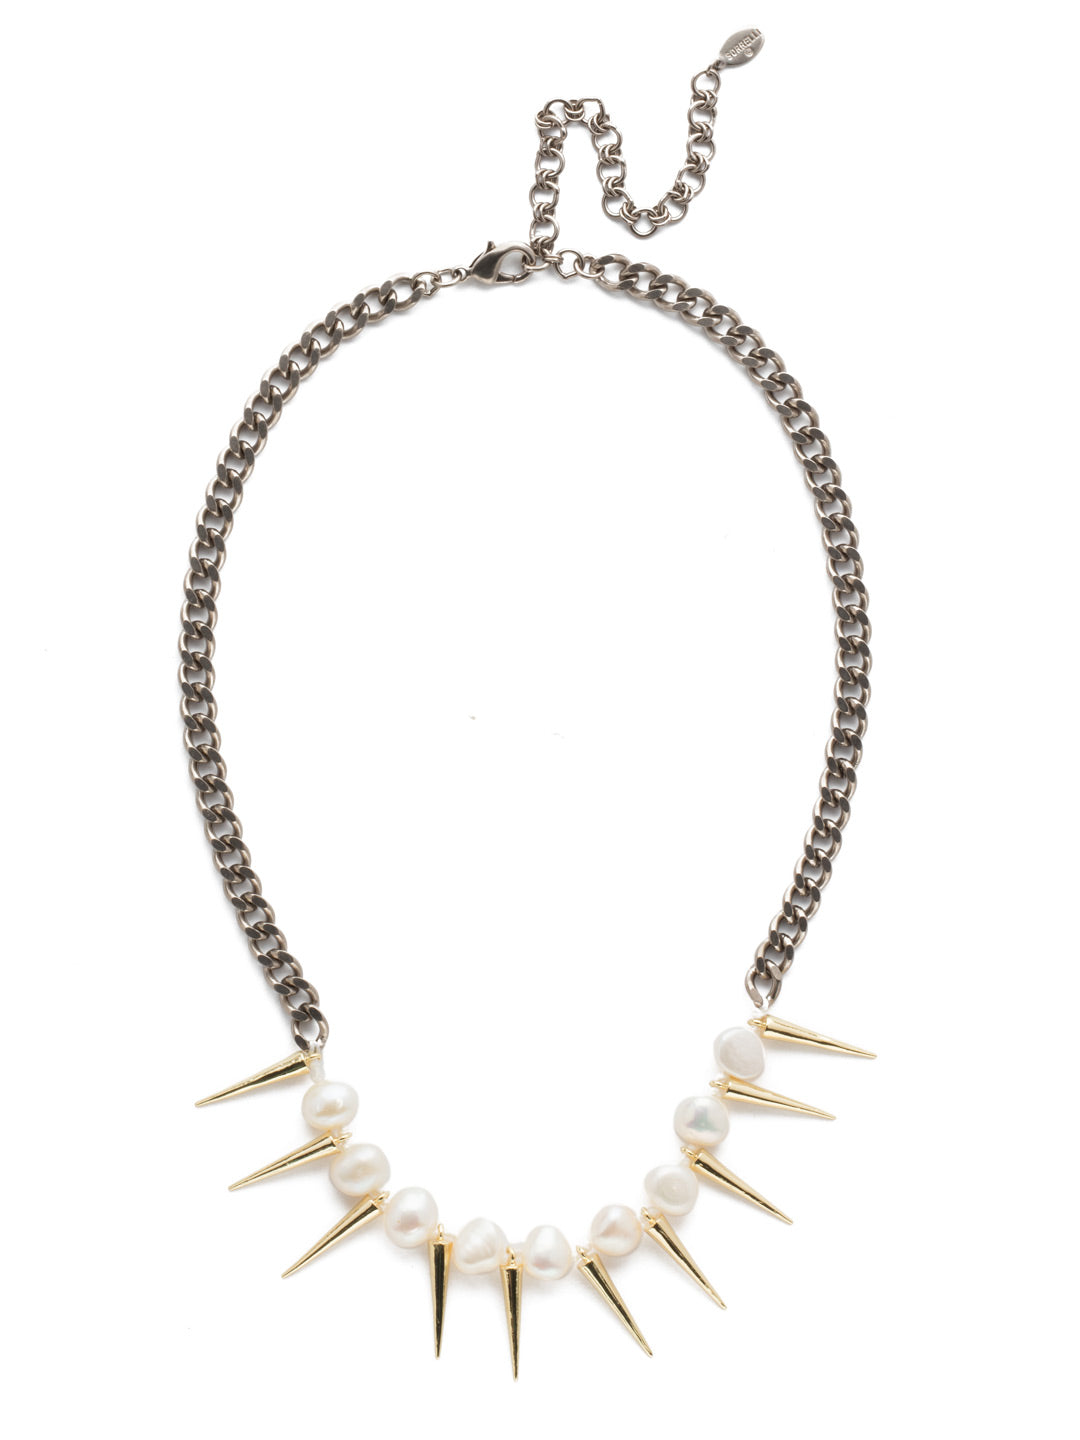 To the Point Classic Necklace - 4NEF11MXMDP - <p>A bit of edge softened by alternating pearls, this adjustable necklace embraces your tough side and your appreciation for the classics all at once. From Sorrelli's Modern Pearl collection in our Mixed Metal finish.</p>